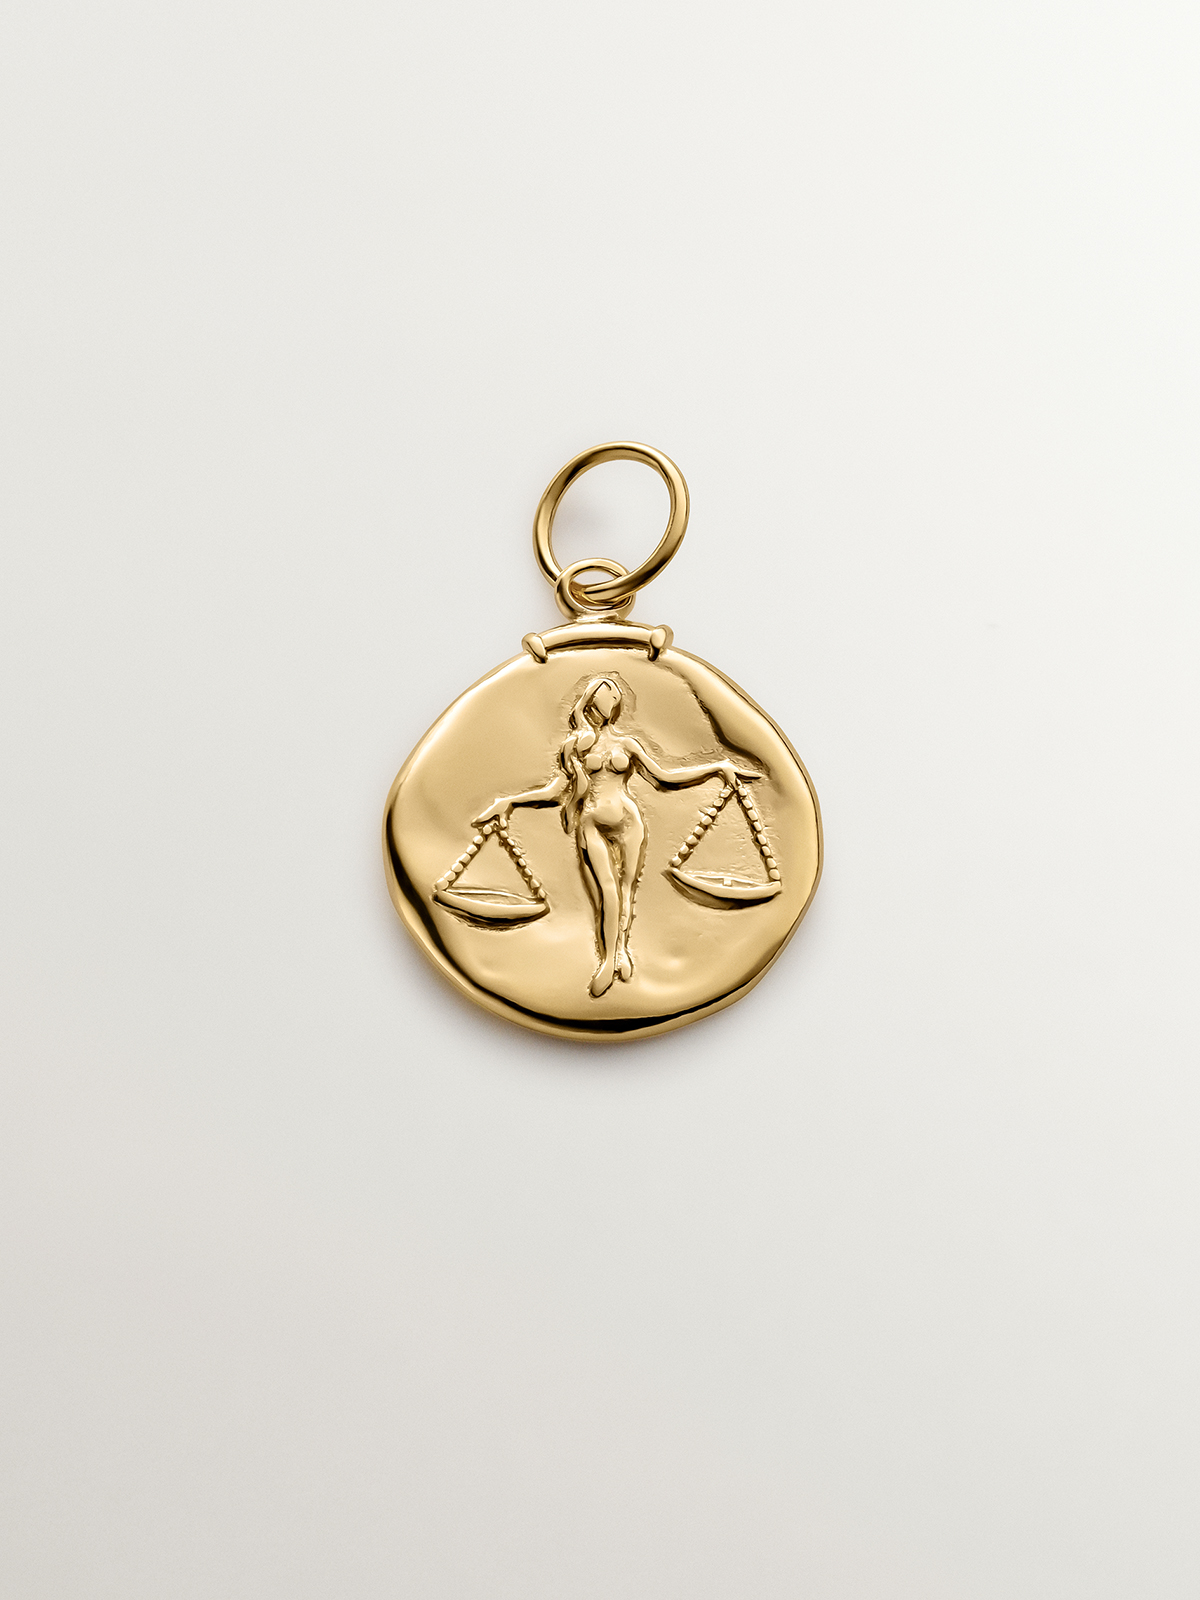 925 Silver Libra Charm bathed in 18K yellow gold